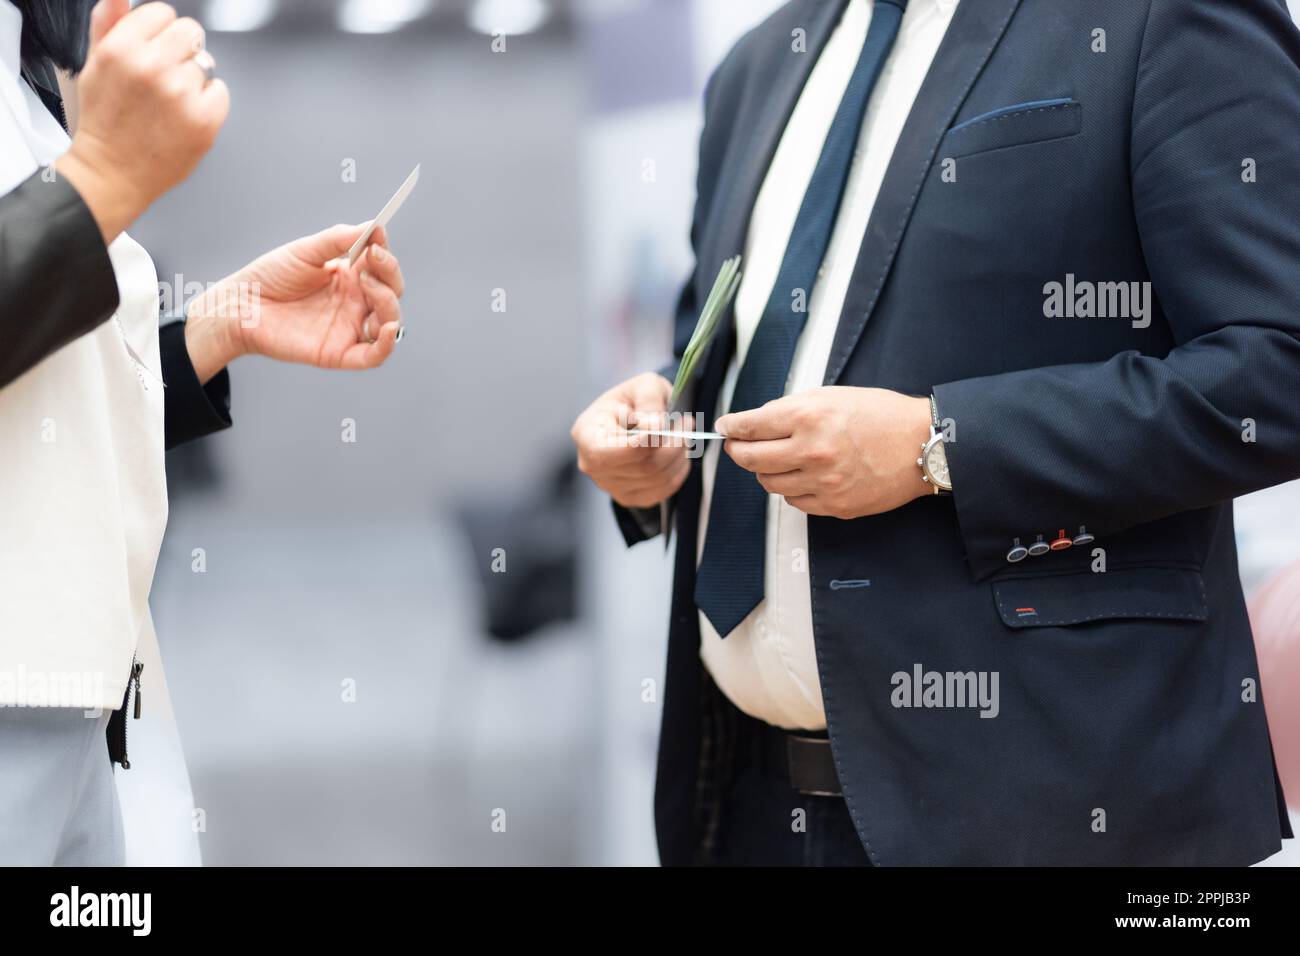 Business people exchanging business card on business meeting, Business discussion talking deal concept Stock Photo